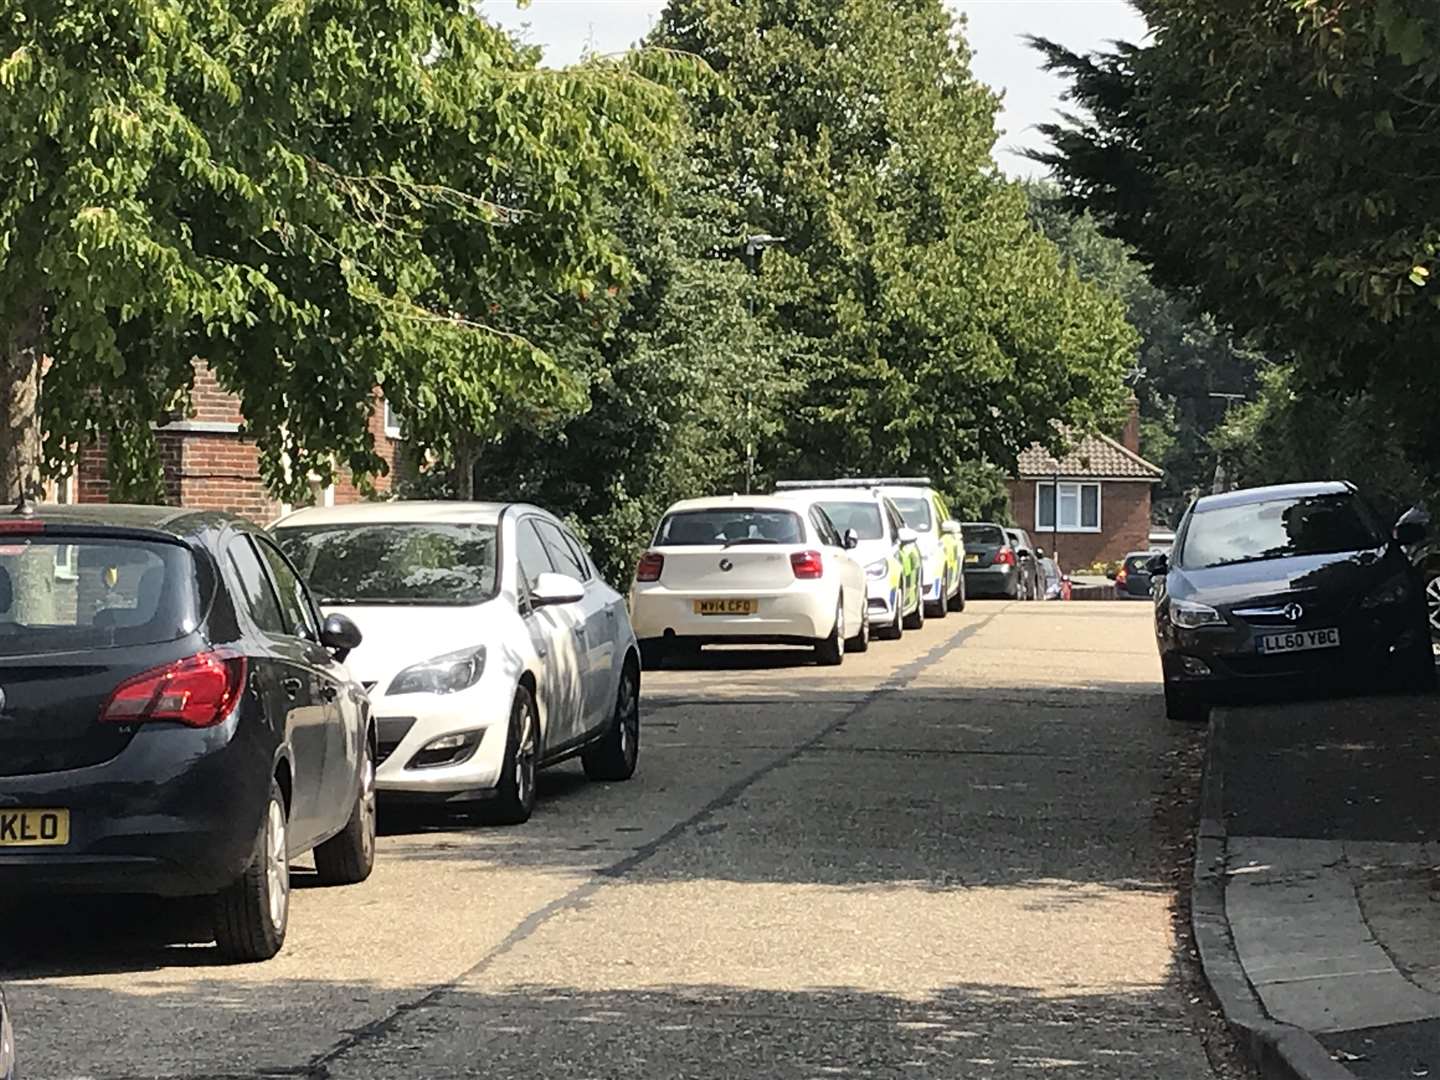 Police in Cambria Avenue, Borstal, where officers entered a property in connection with the fatal accident